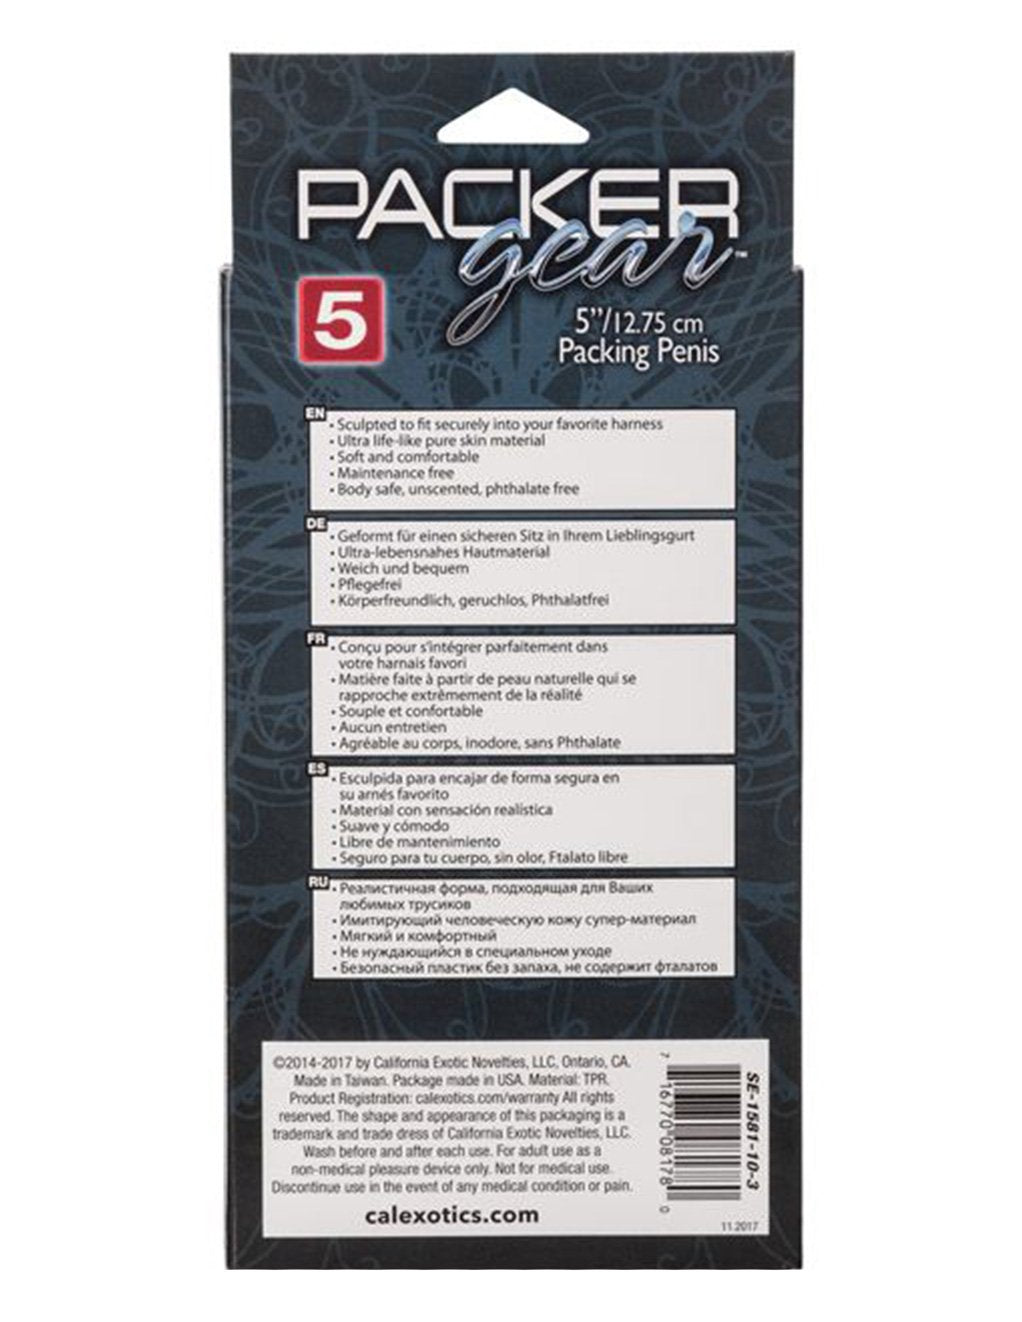 Packer Gear 5 Inch Packing Penis- Brown- Back box